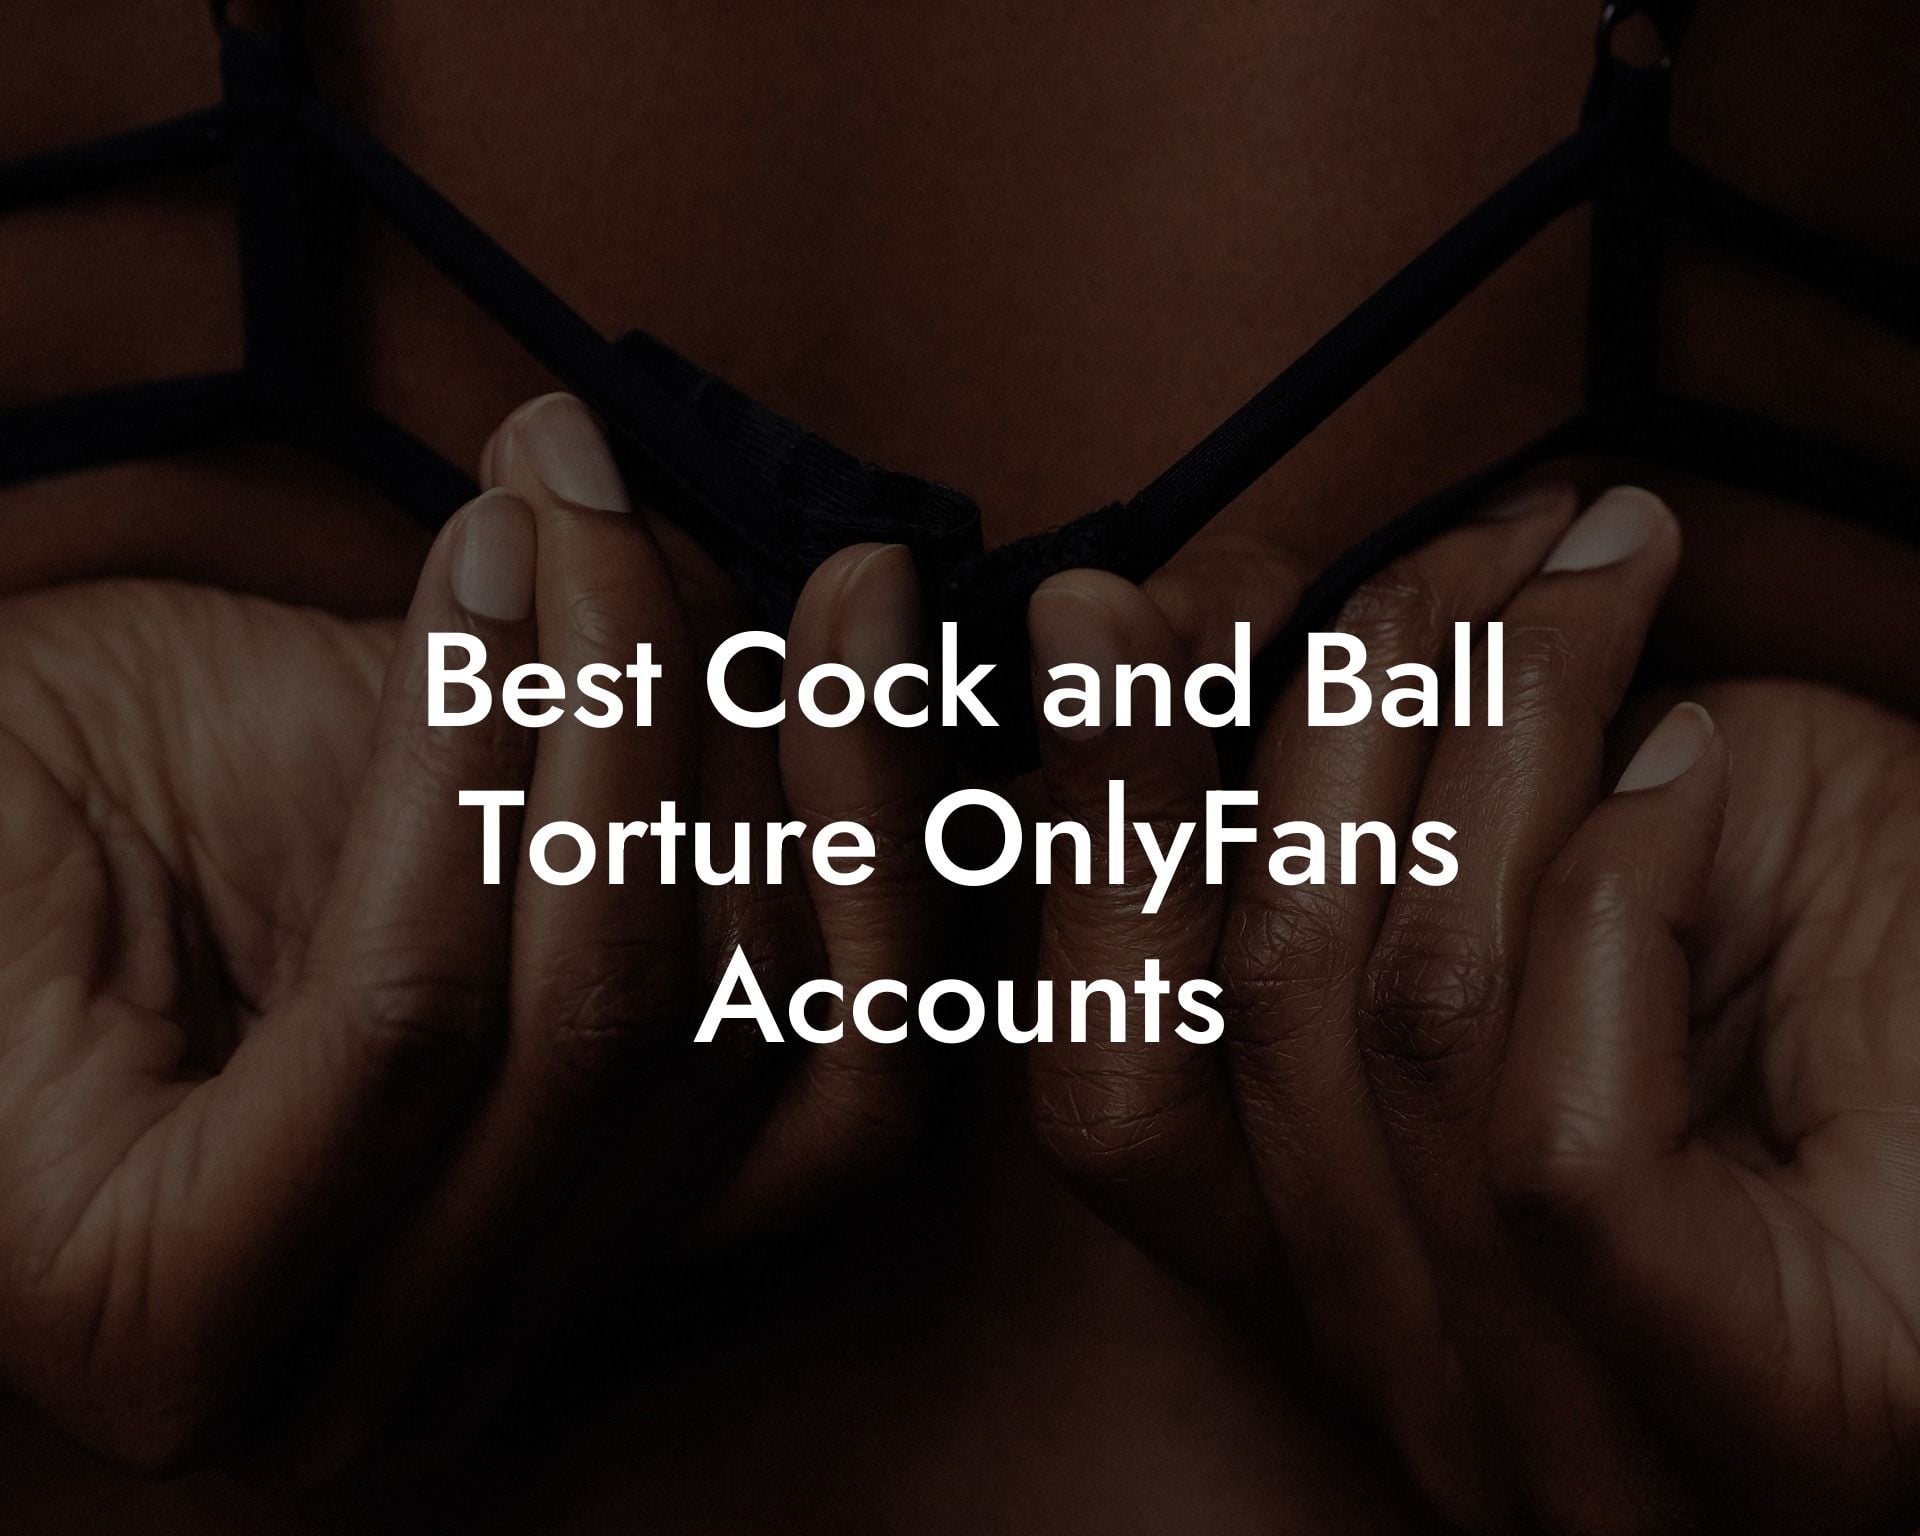 Best Cock and Ball Torture OnlyFans Accounts